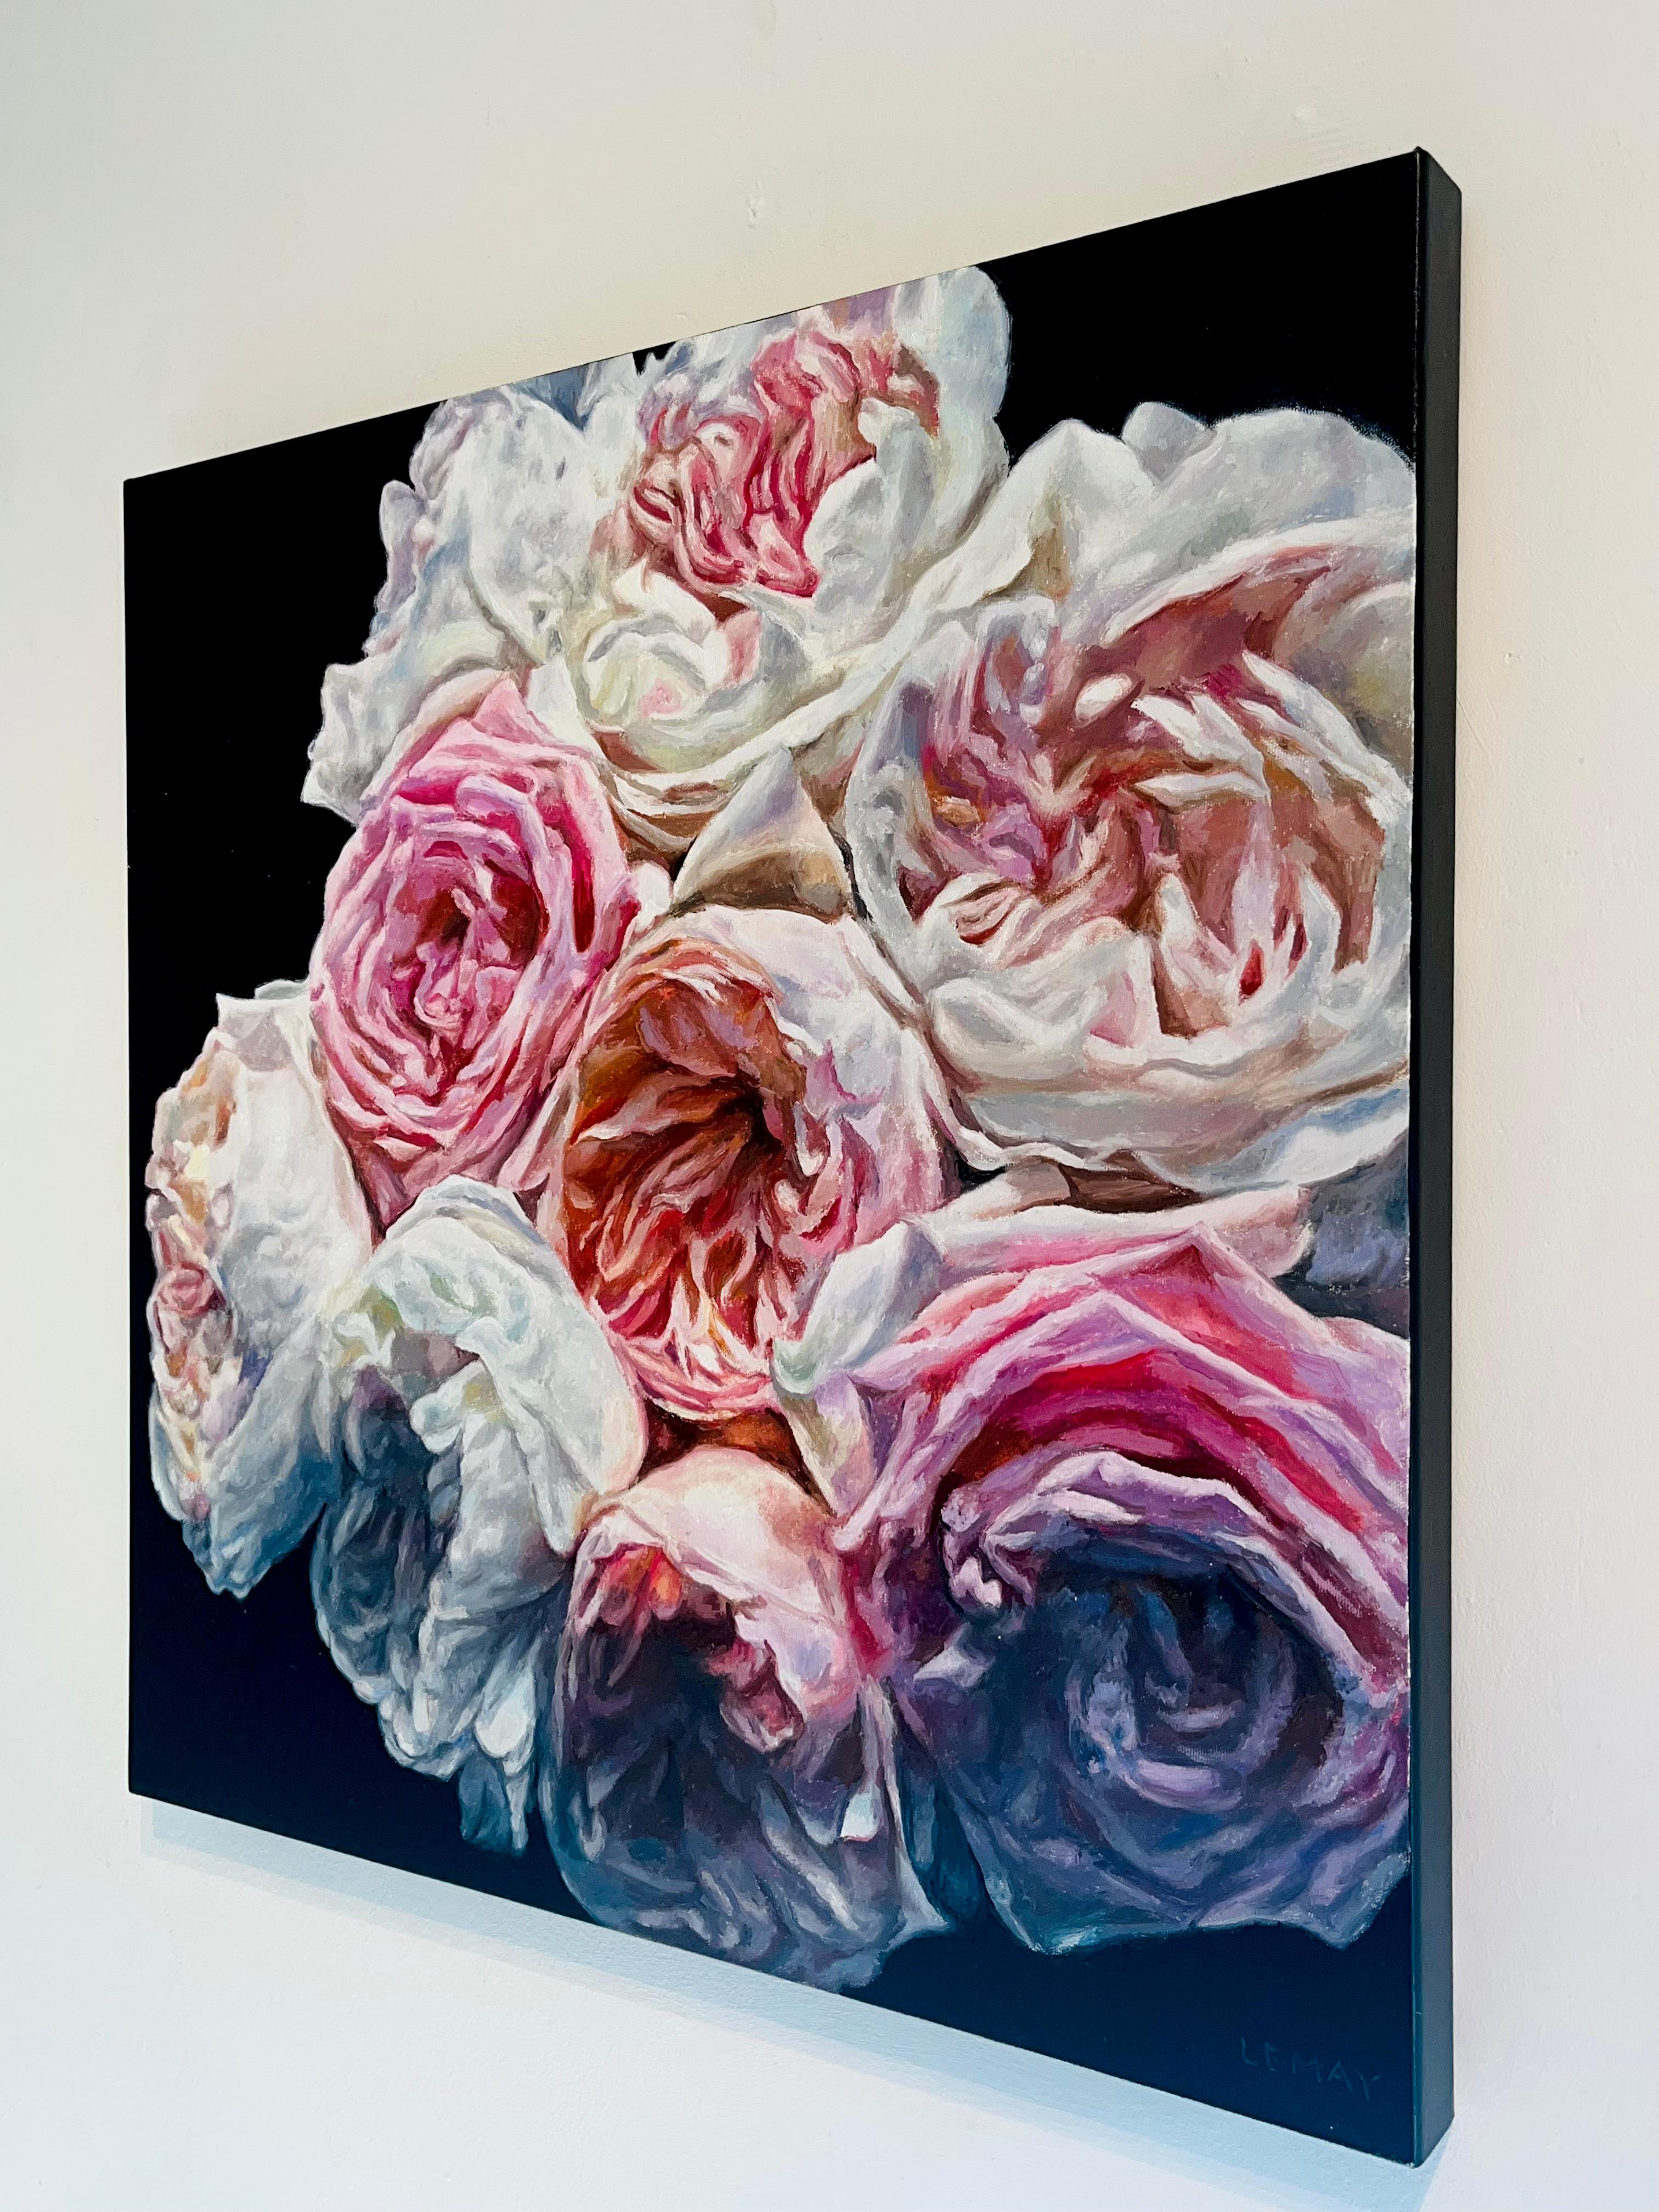 David Austin Roses-original modern realism floral oil painting-contemporary Art - Realist Painting by Robert Lemay